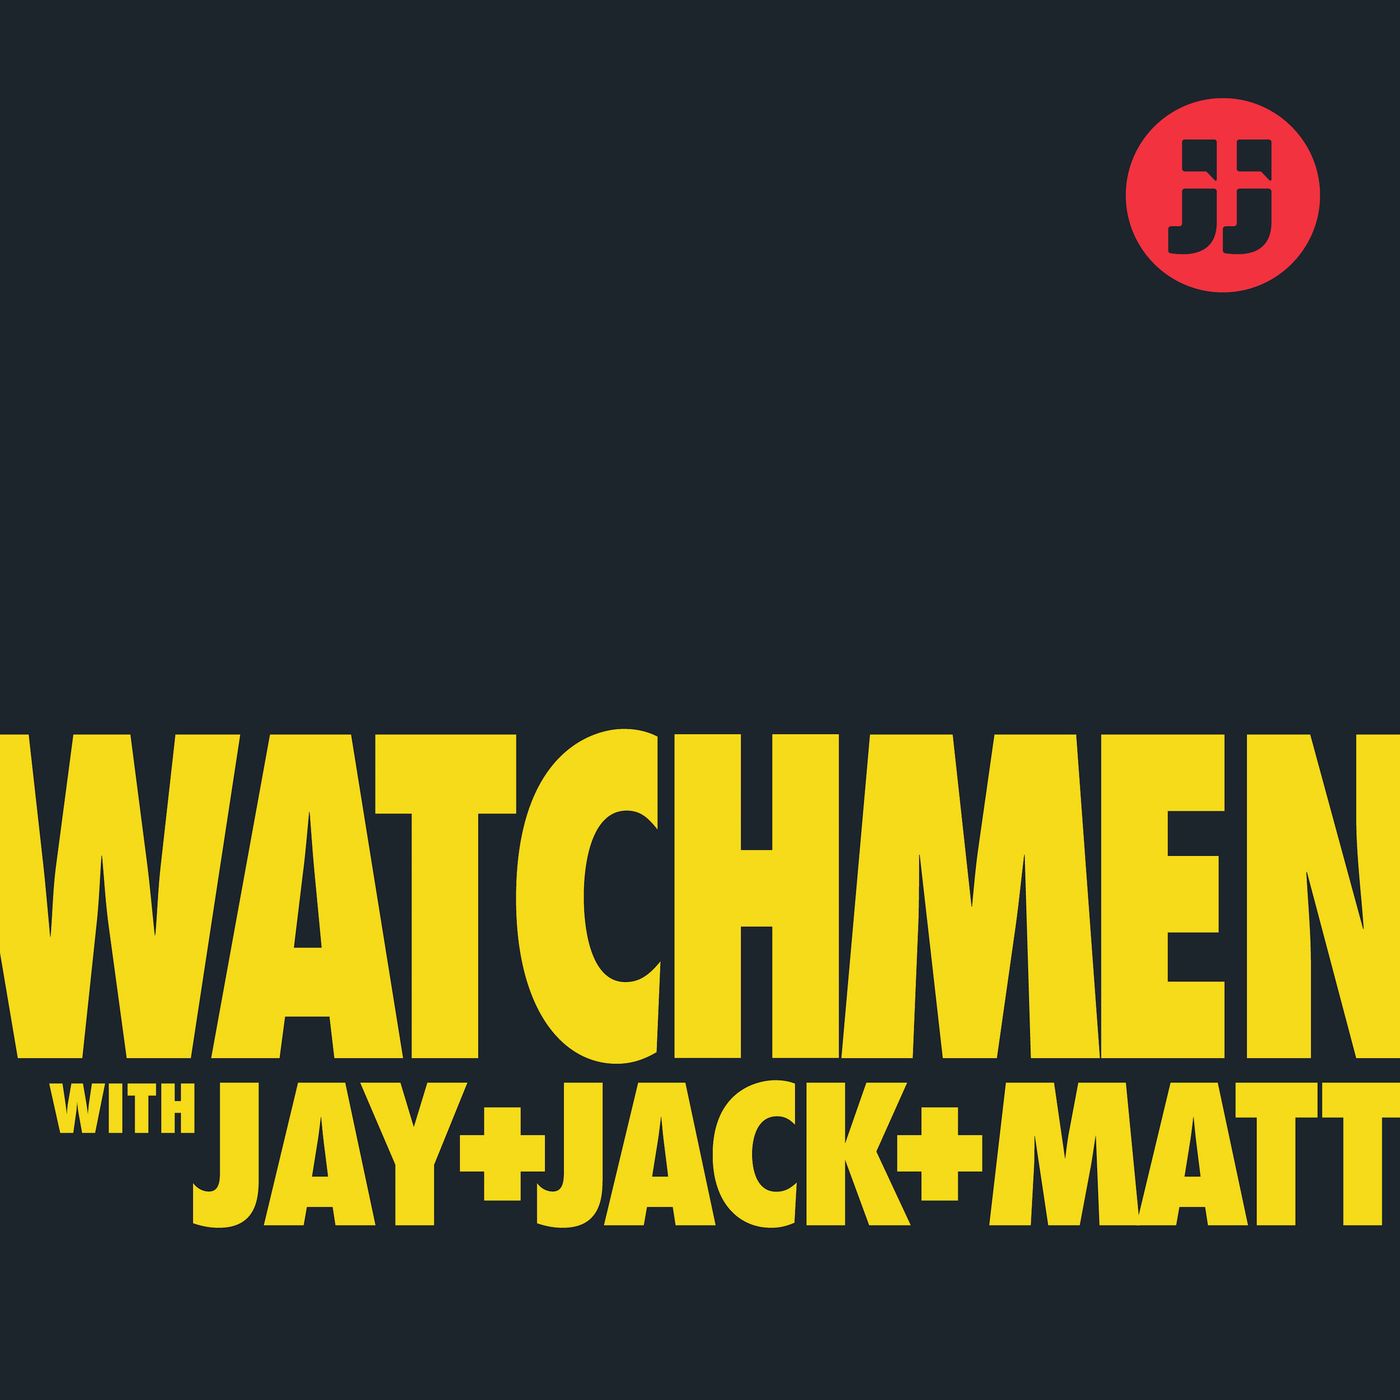 Watchmen with Jay, Jack+ Matt: Ep. 1.9 “See How They Fly”